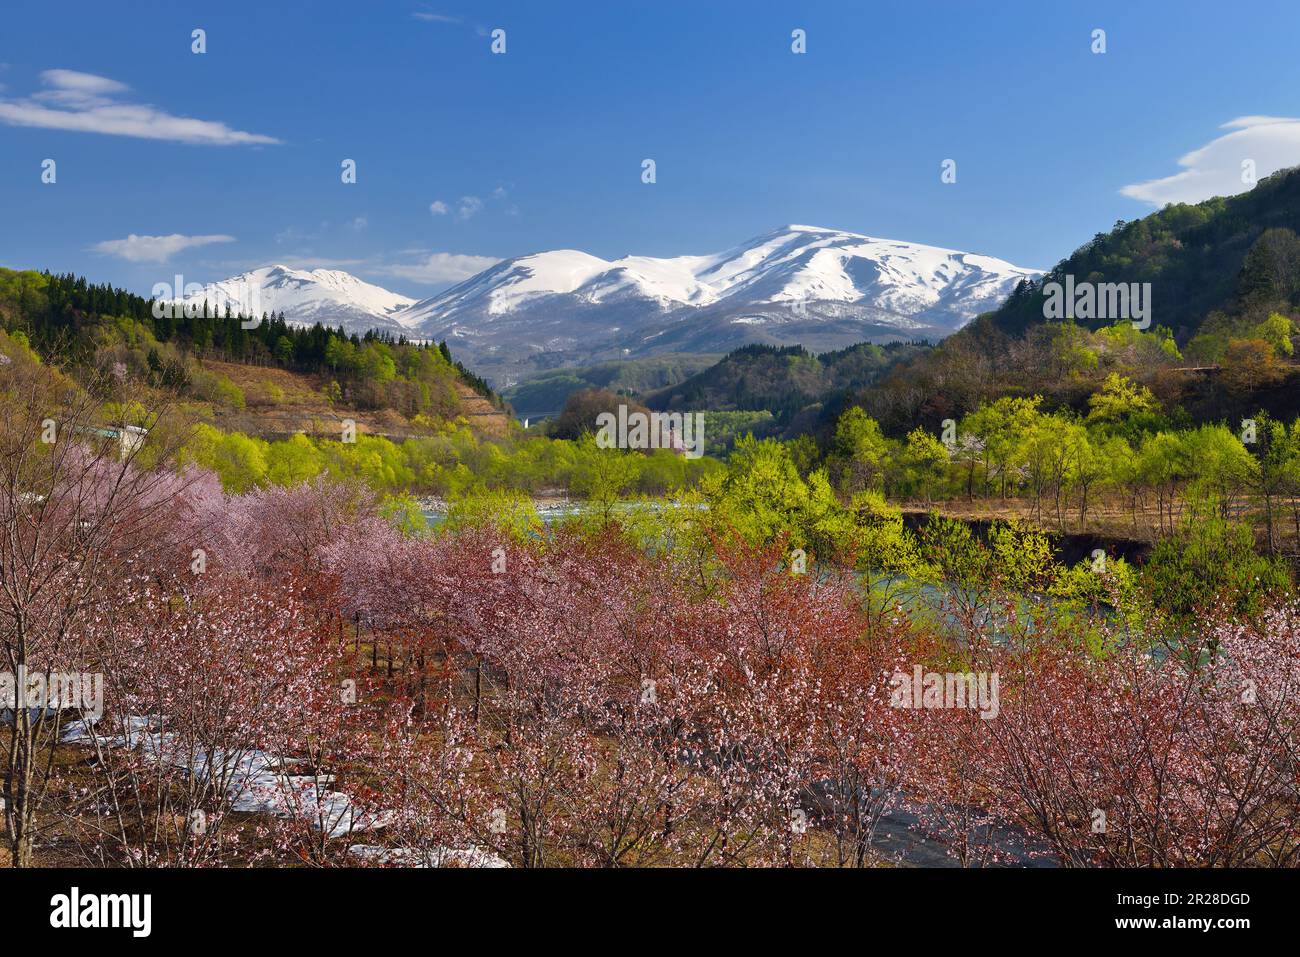 Cherry blossoms, verdure, and Mount Gassan Stock Photo